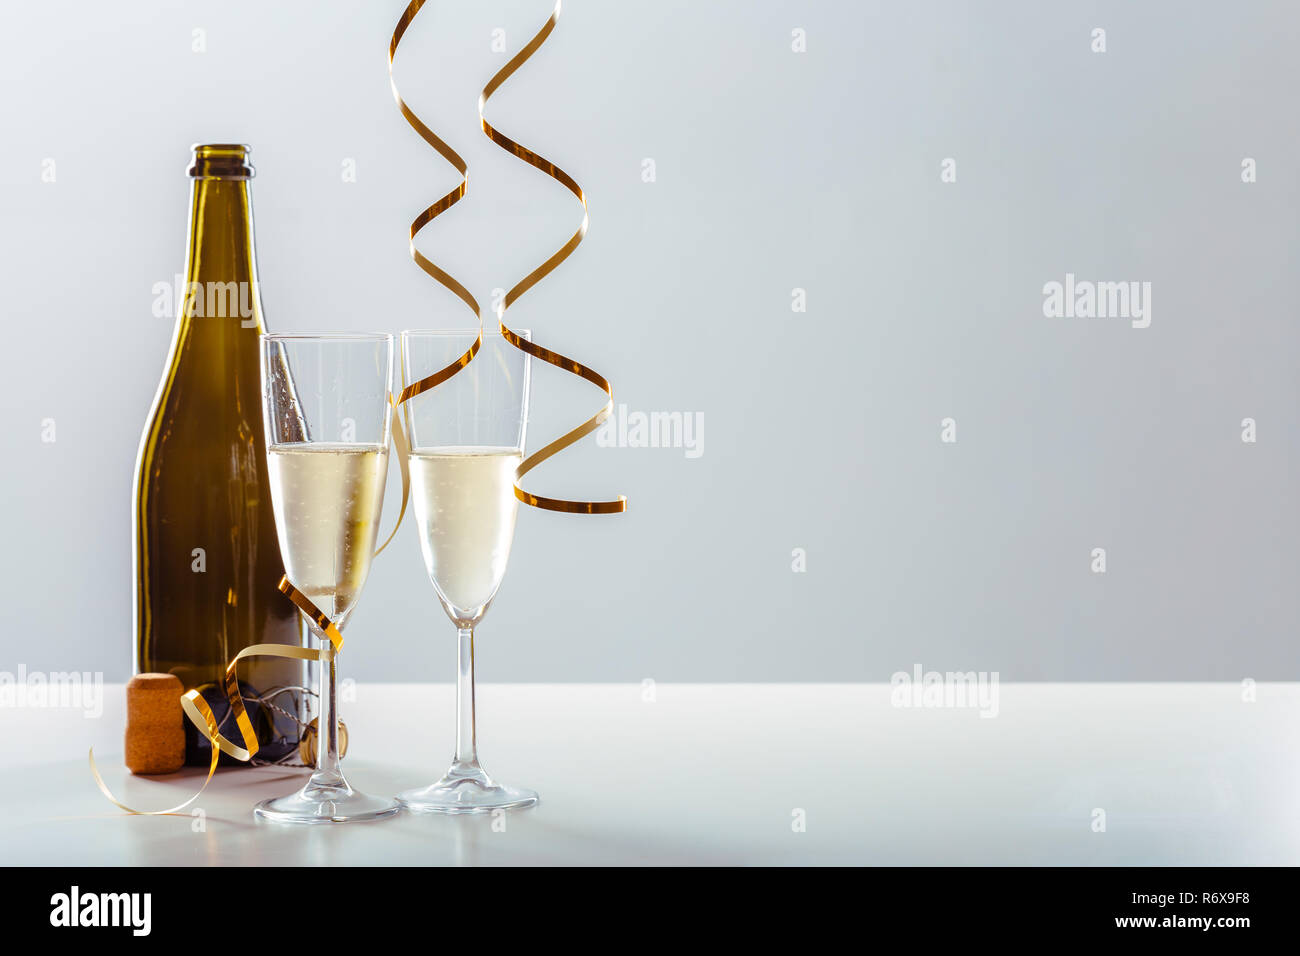 New years eve celebration background with champagne Stock Photo